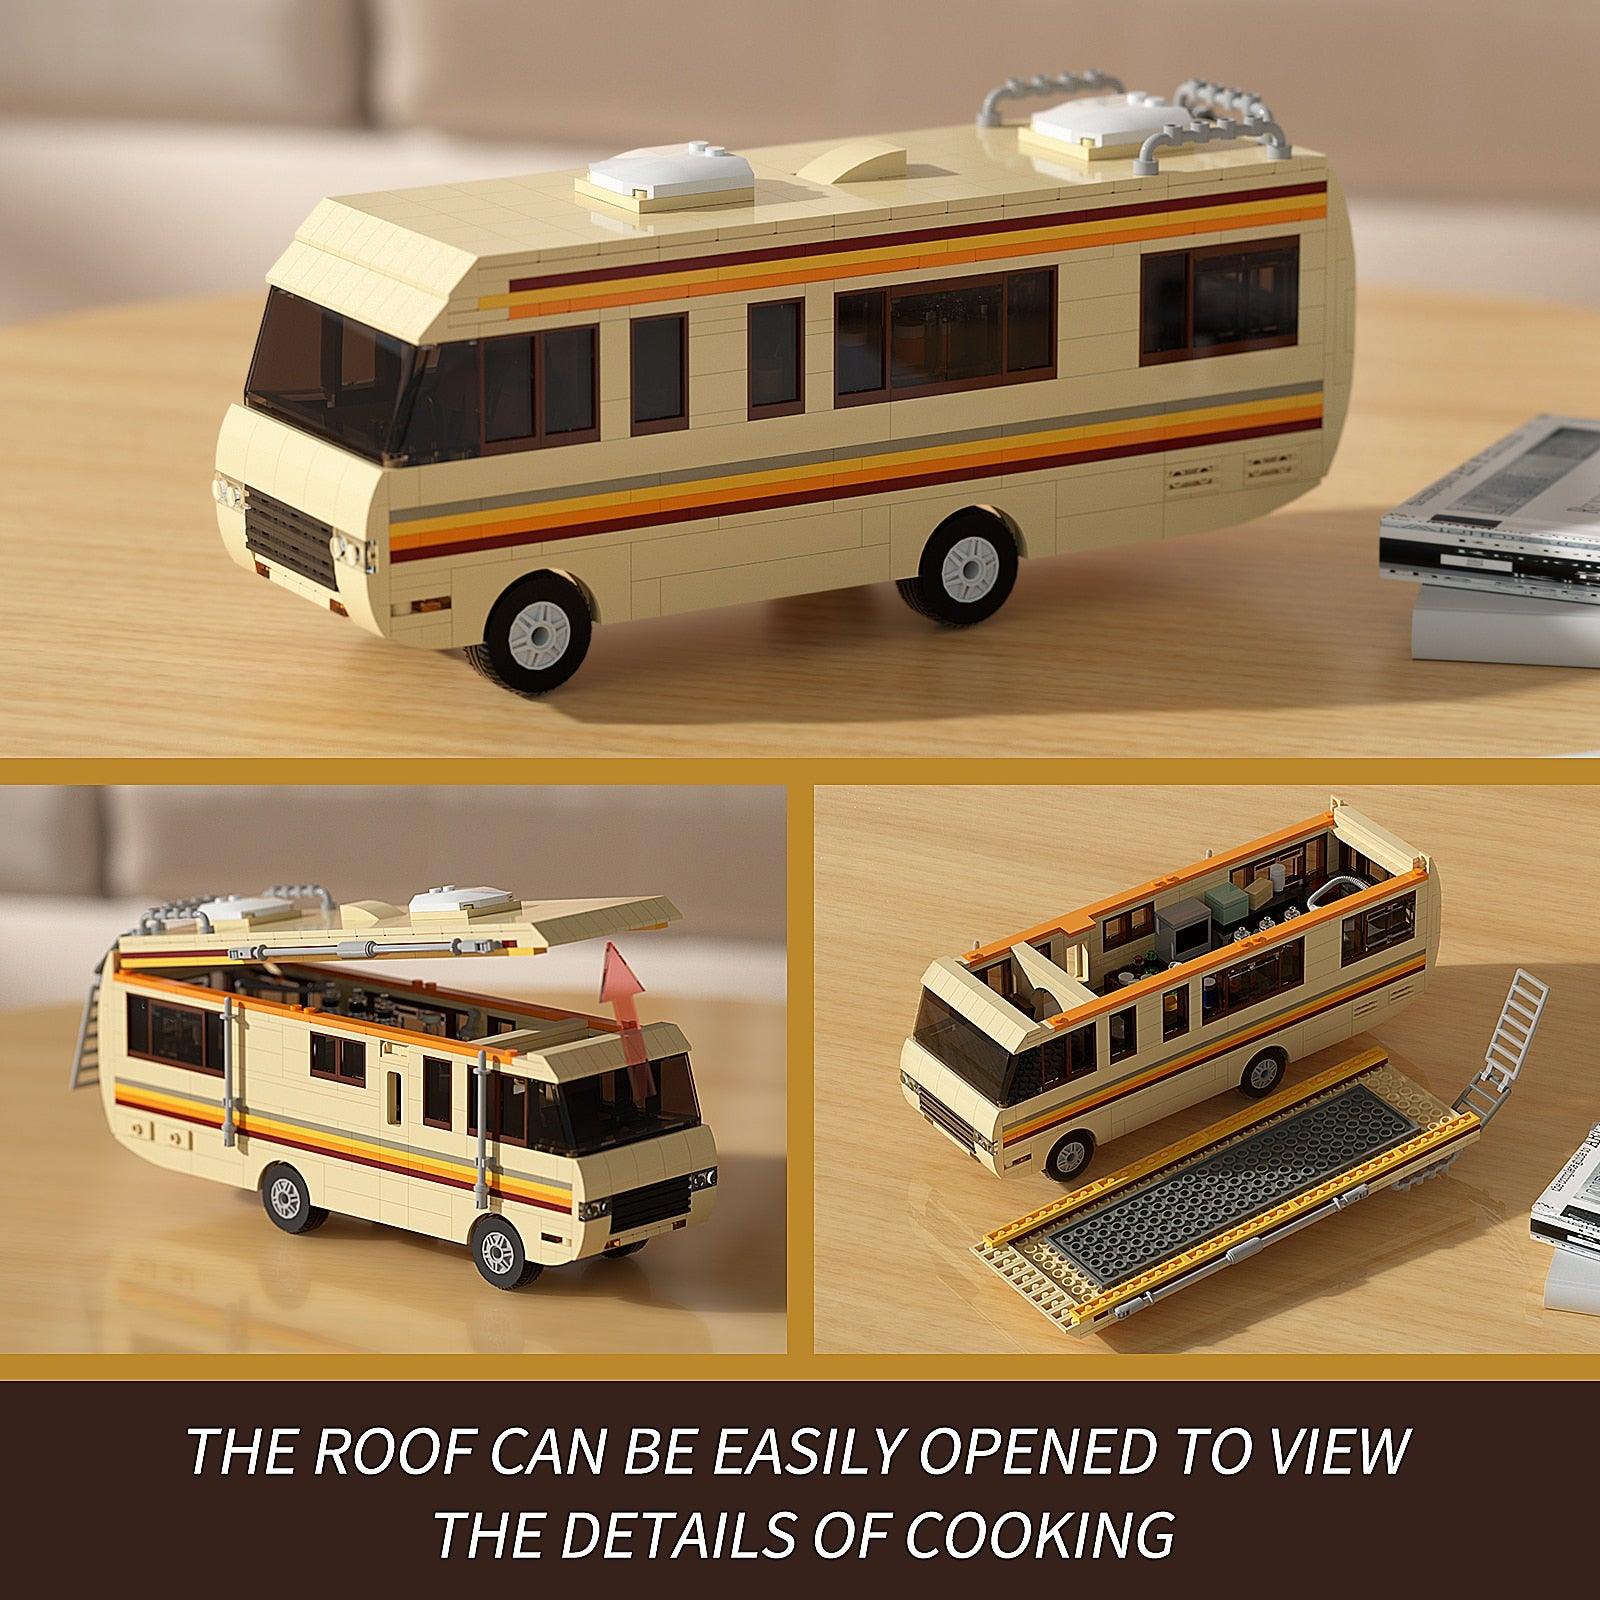 Breaking Bad Car & Walter White s set, compatible with Lego